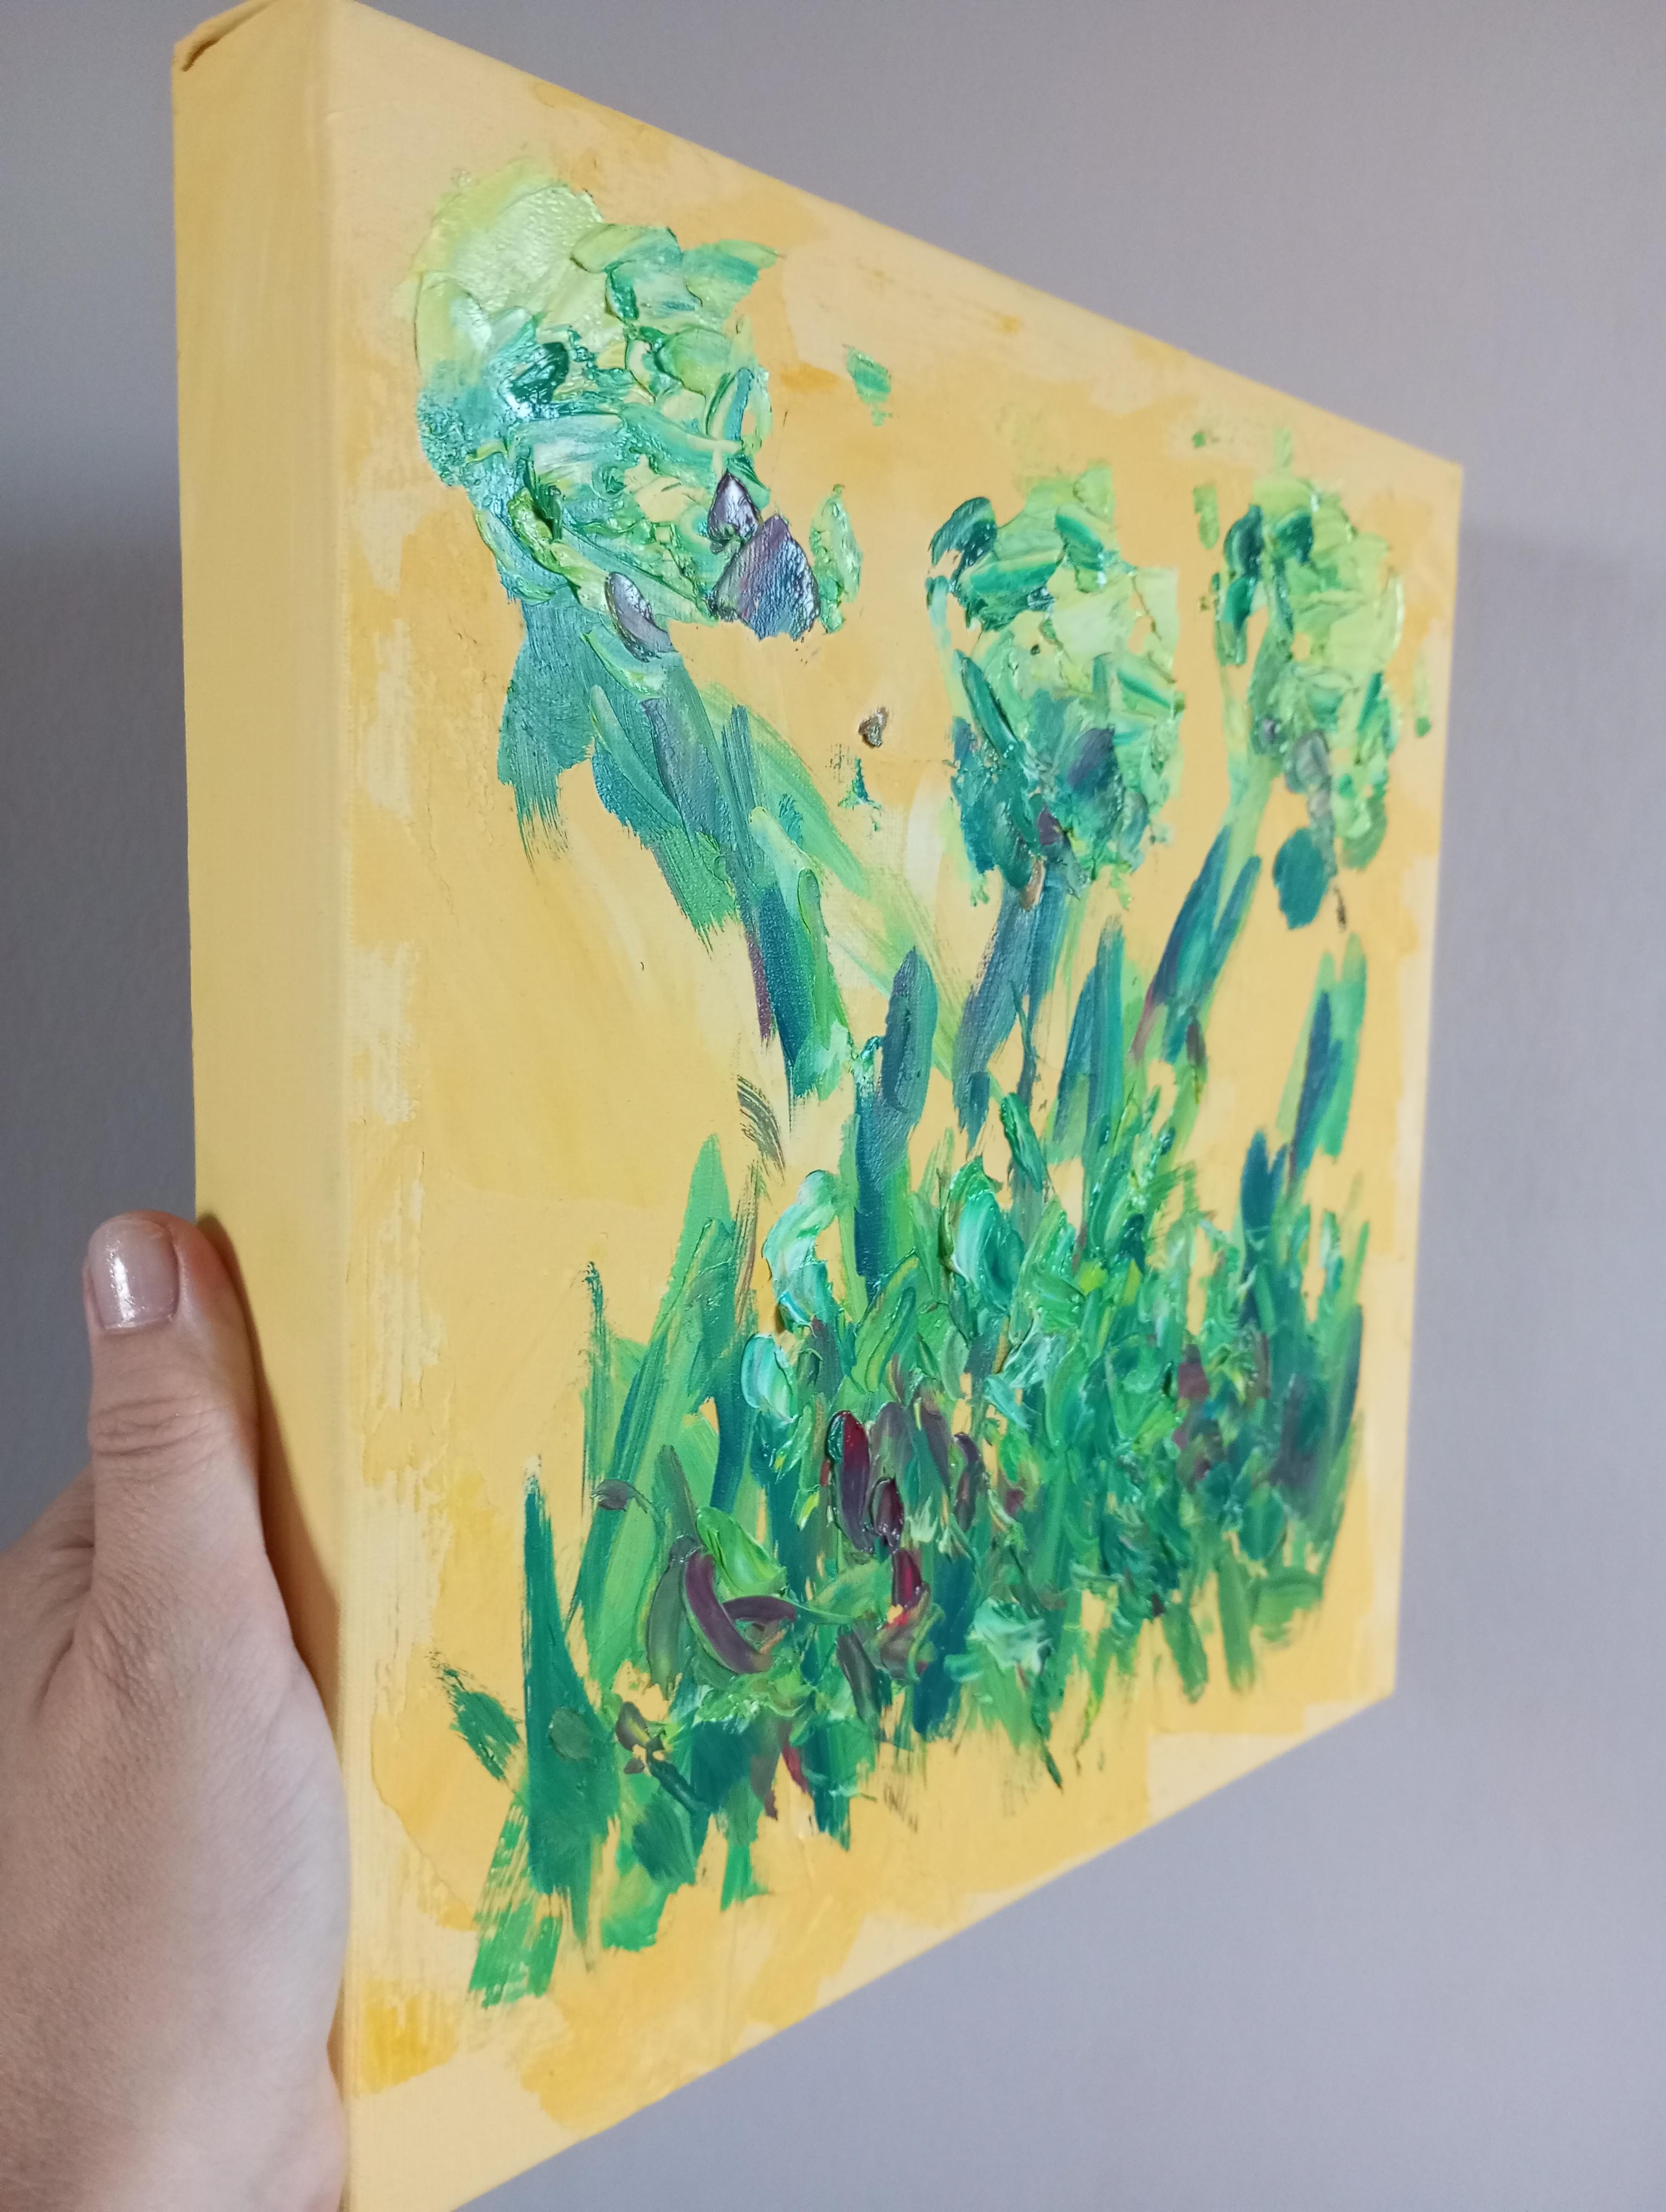 Dear art lover,

I enjoy working on floral and nature compositions. This one was inspired by my trip to Arles, Provence ( south of France) where Vincent Van Gogh lived for one year.  The moist important thing for Van Gogh was the light.  He said